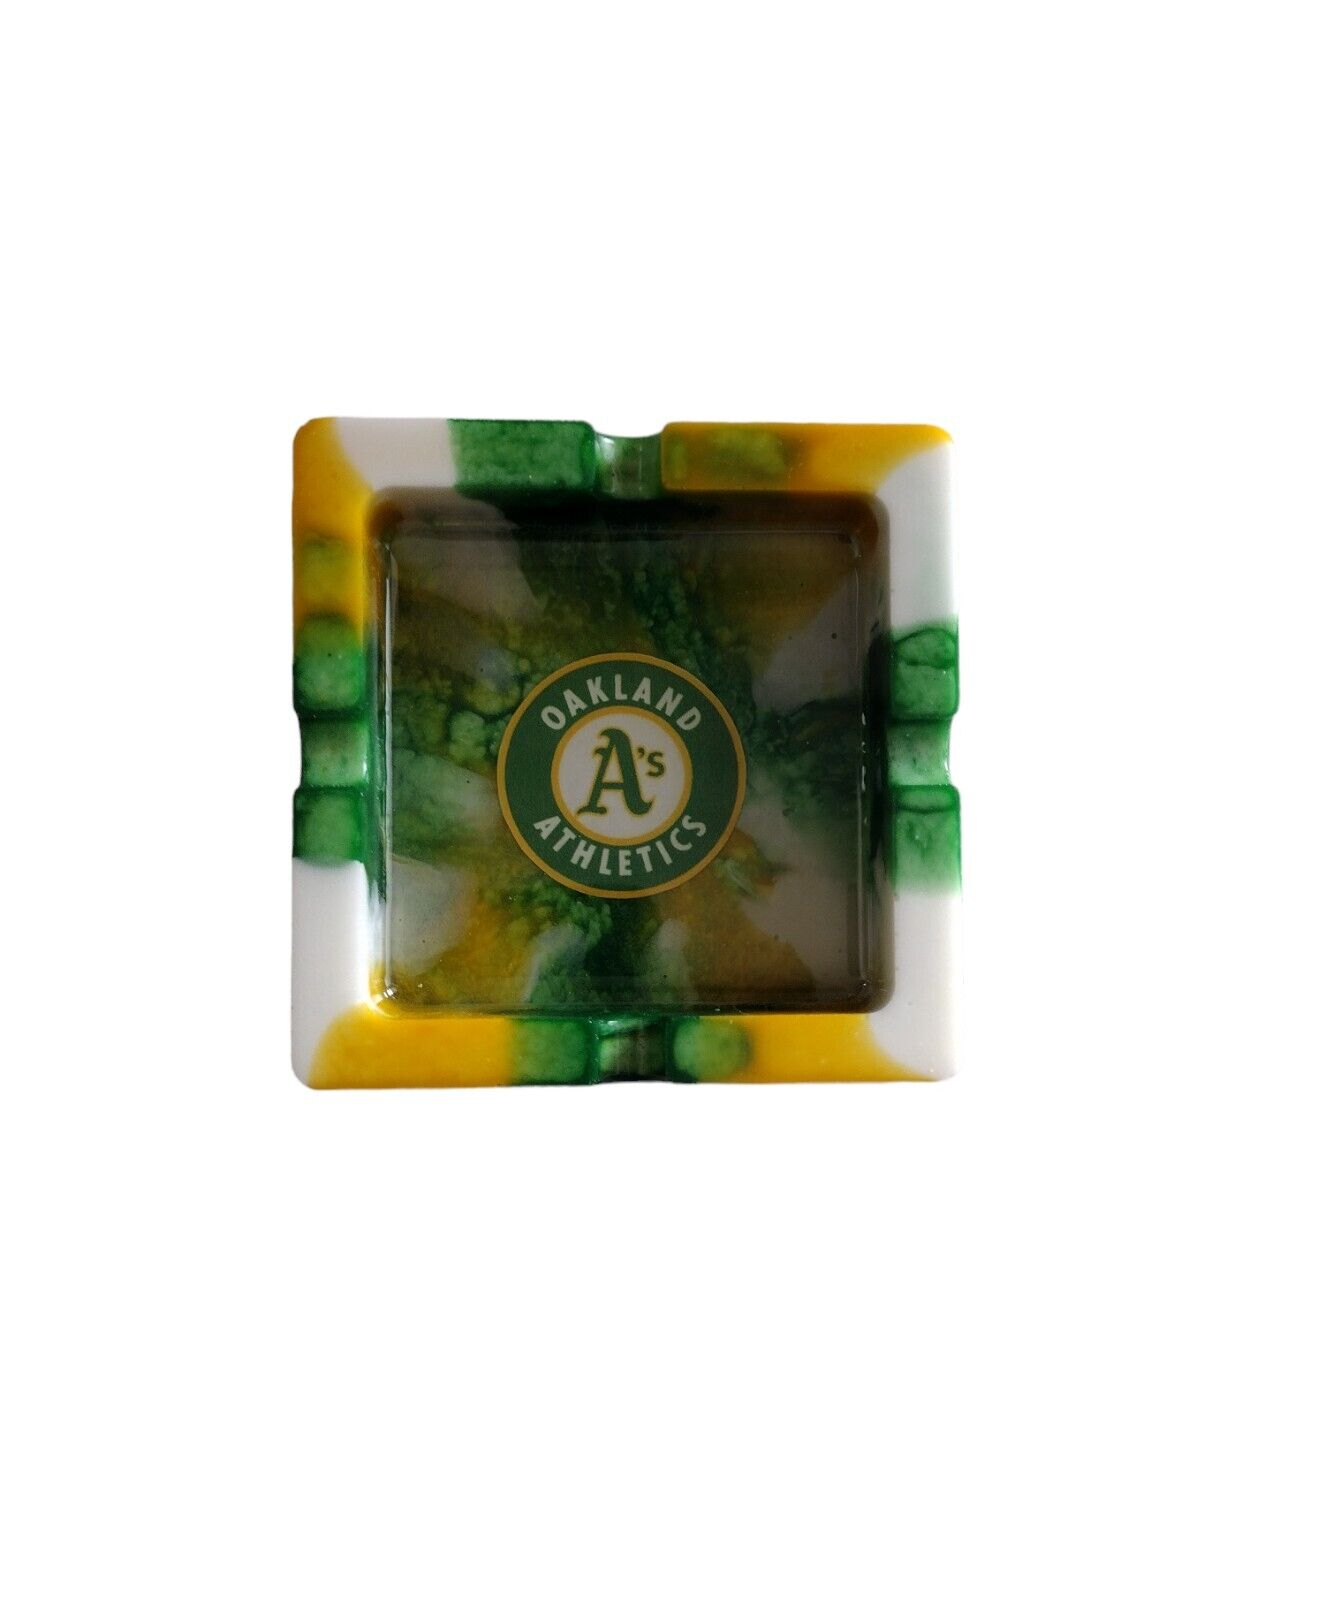 Oakland A's Cigarette Ashtray/ Oakland A's Sports Gifts/ House Gifts/ Gifts